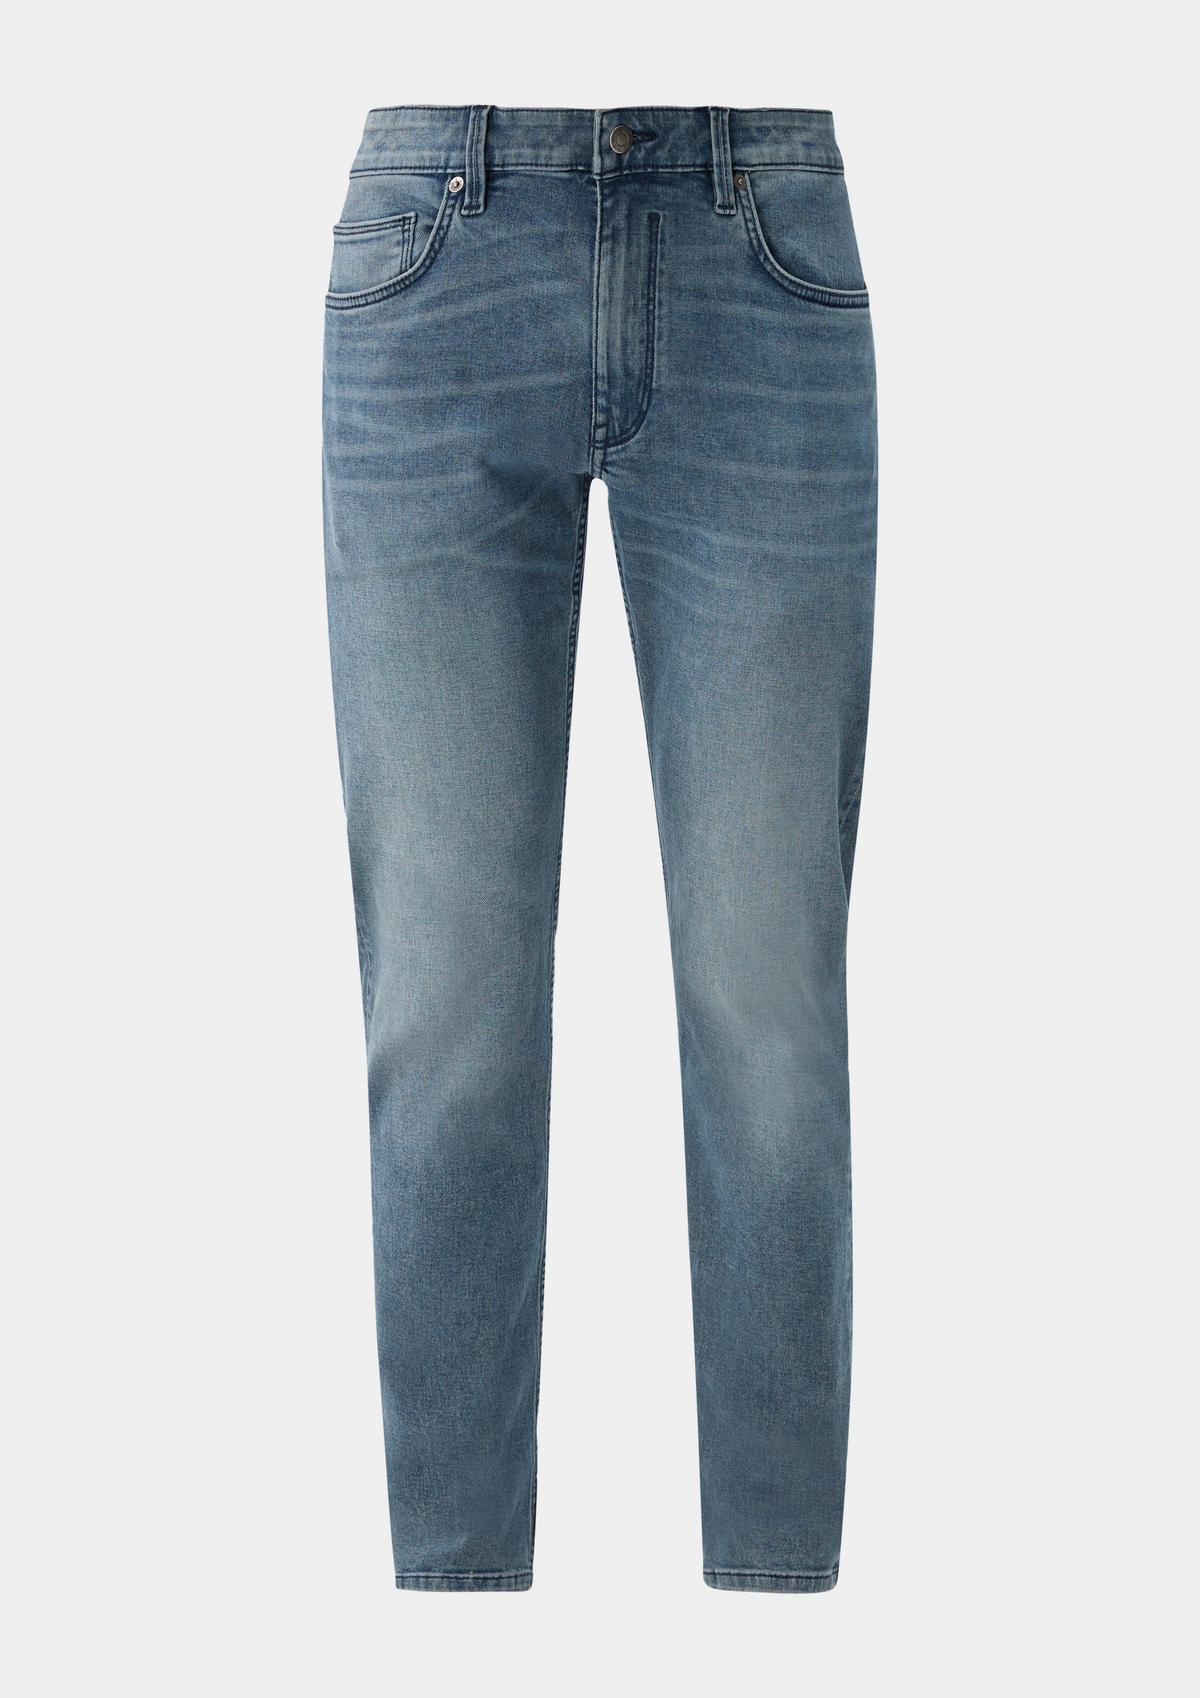 s.Oliver Jeans Carson / Slim Fit / Mid Rise / Tapered Leg